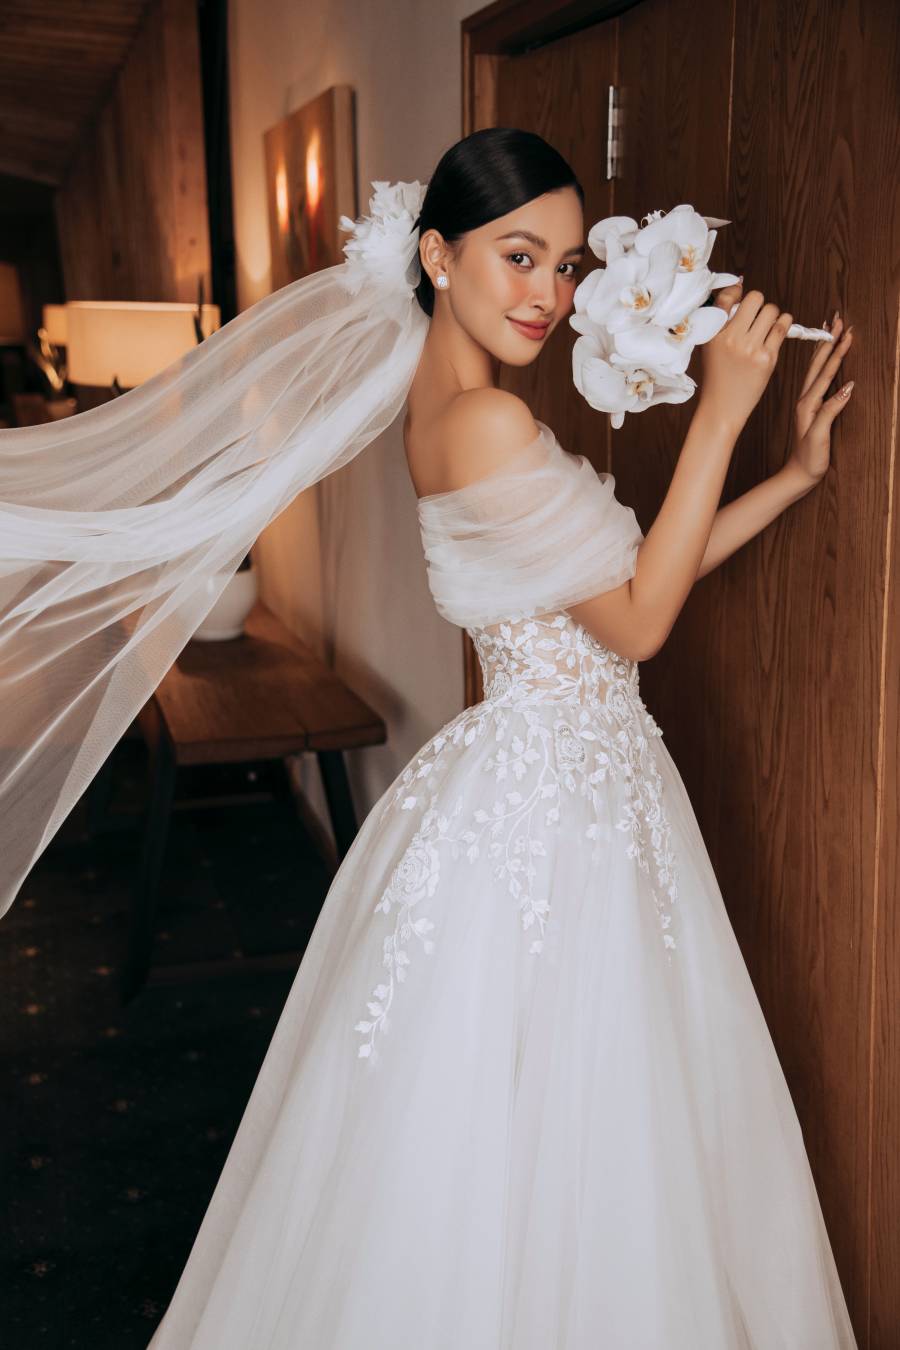 Miss Tieu Vy transforms into a beautiful bride in a wedding dress - 7